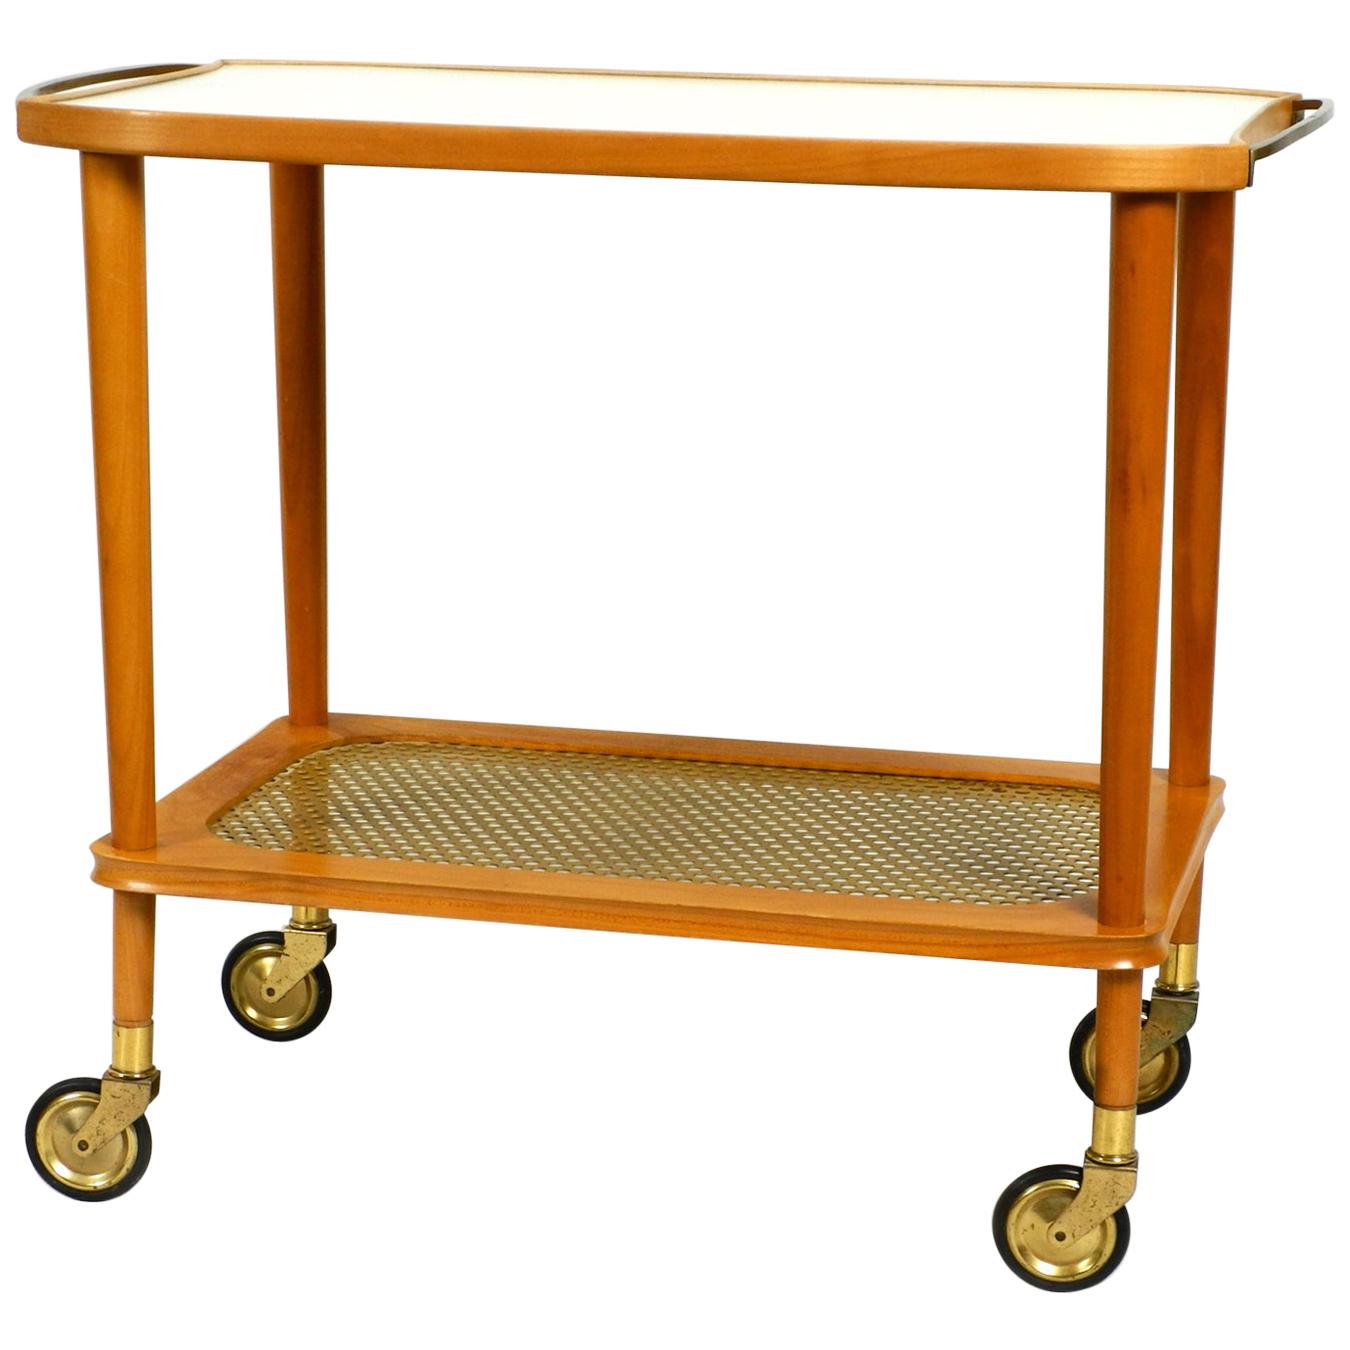 Beautiful Mid-Century Modern Serving Trolley Made of Walnut Wood and Brass